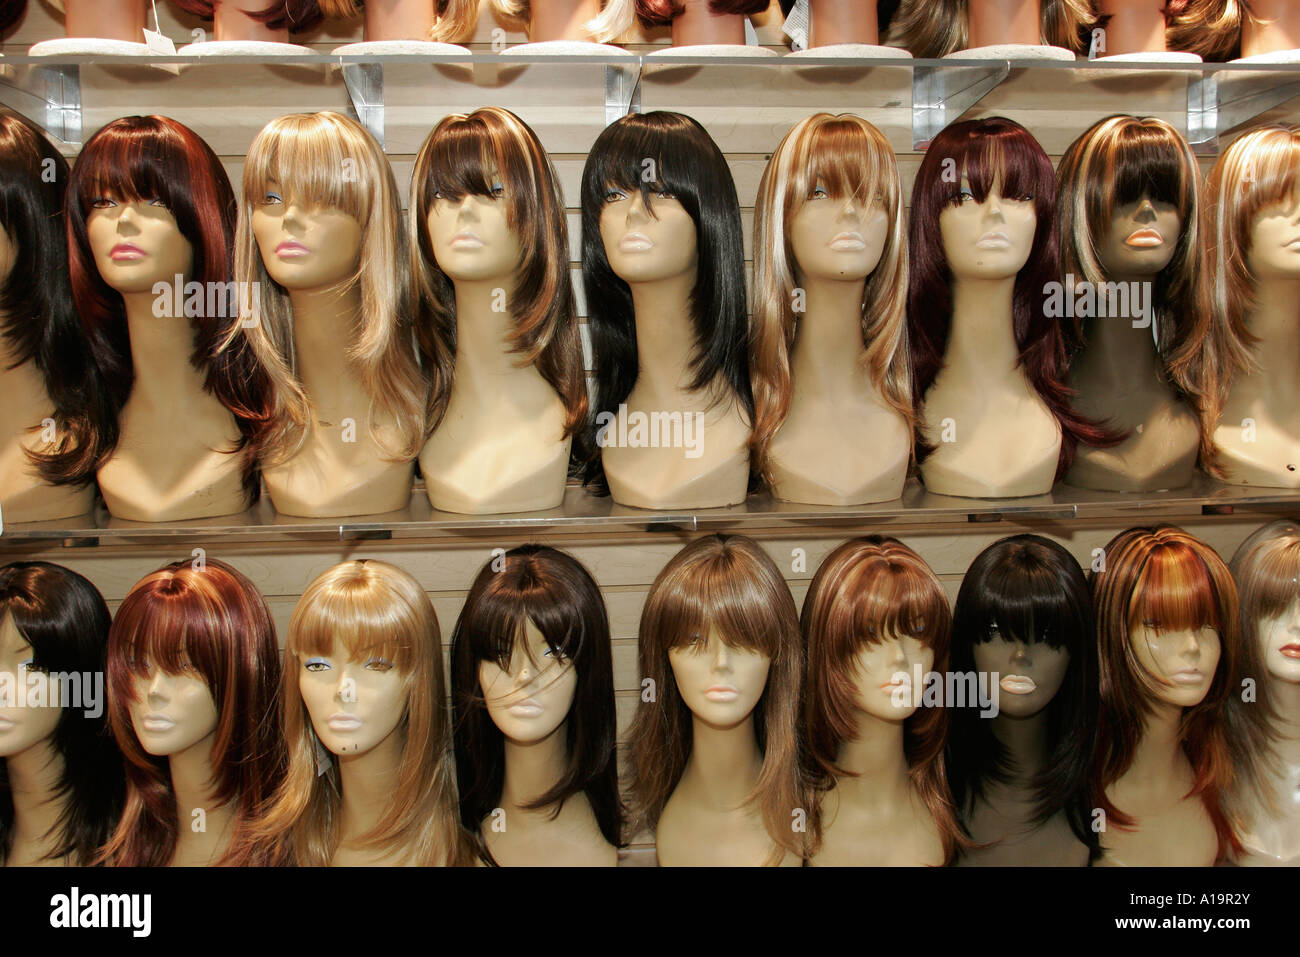 Female Wigs High Resolution Stock Photography and Images - Alamy